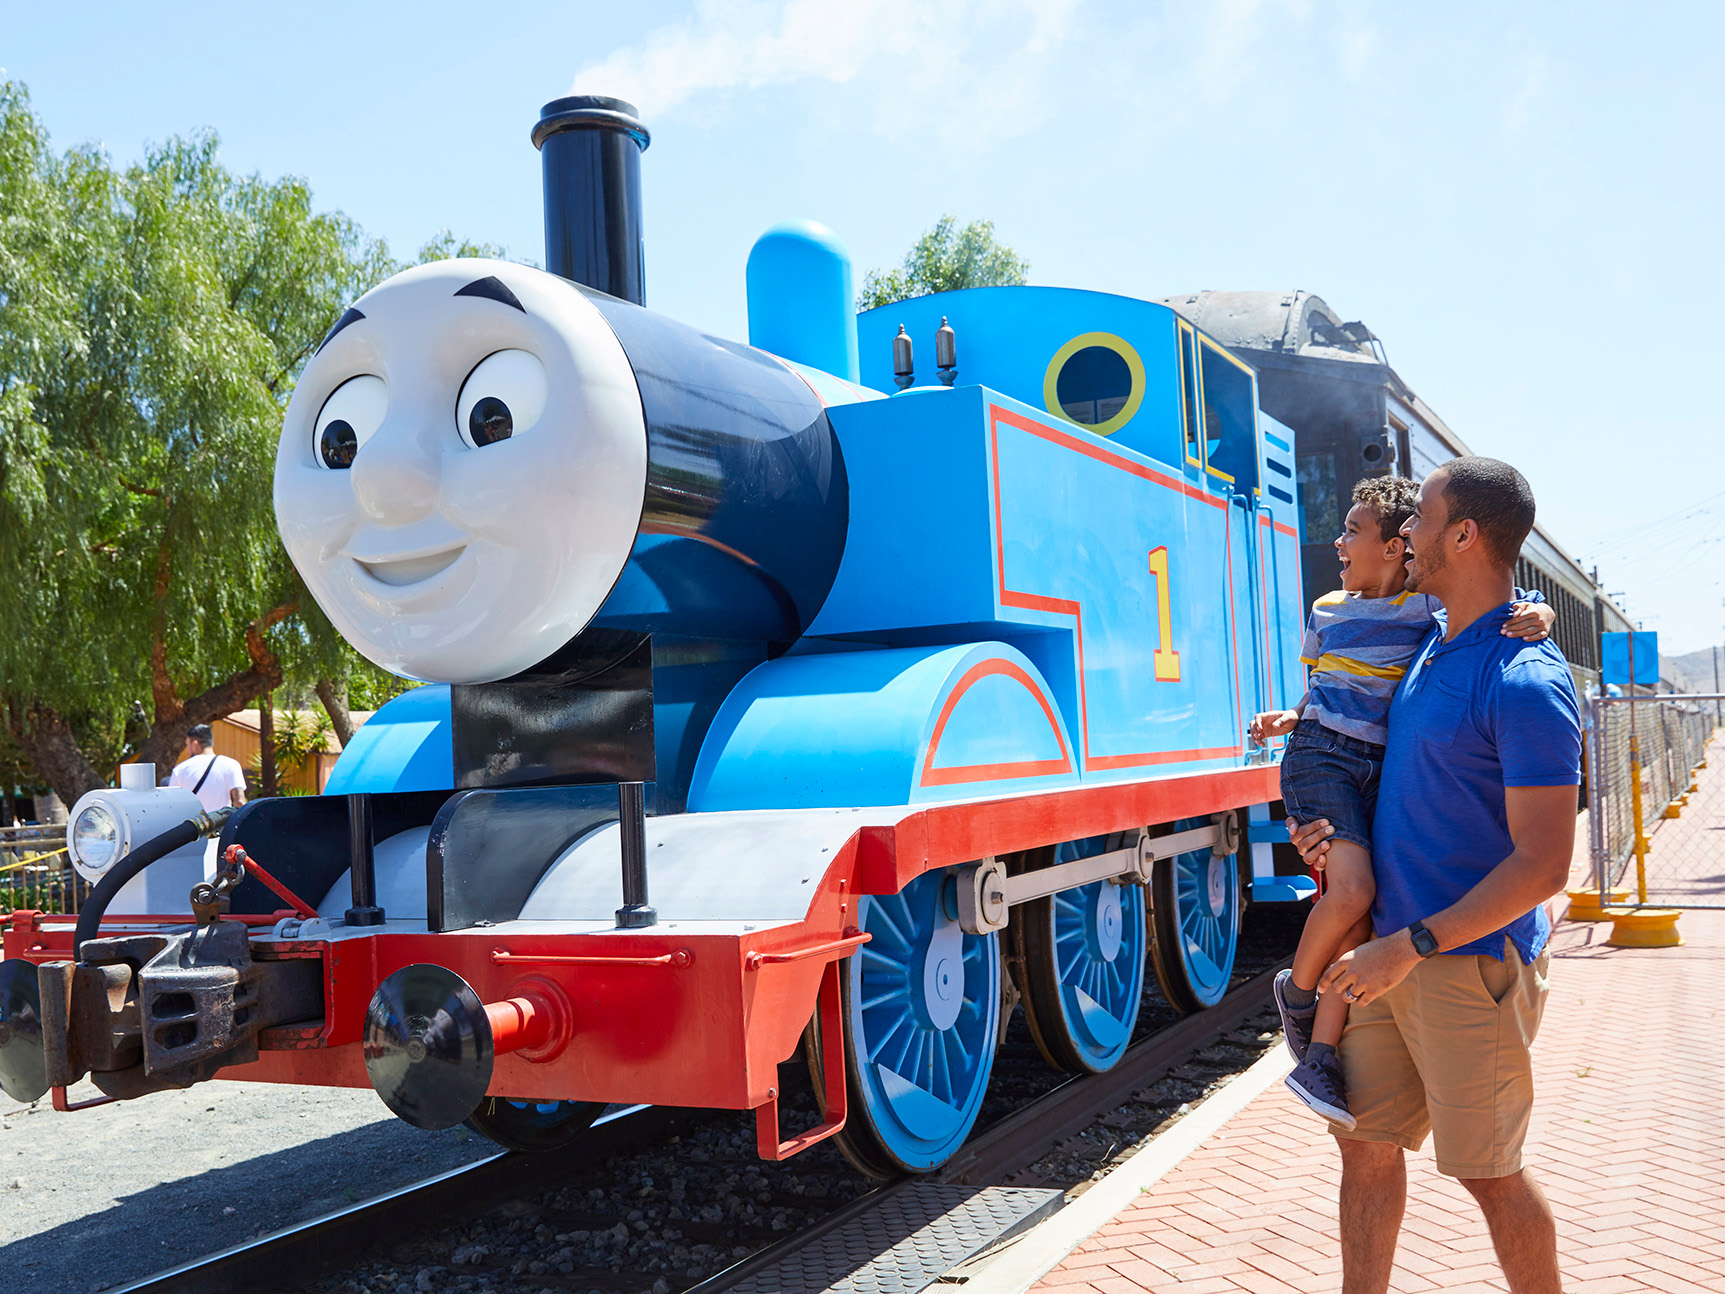 Day Out With Thomas™ is heading to Grapevine Vintage Railroad Blue